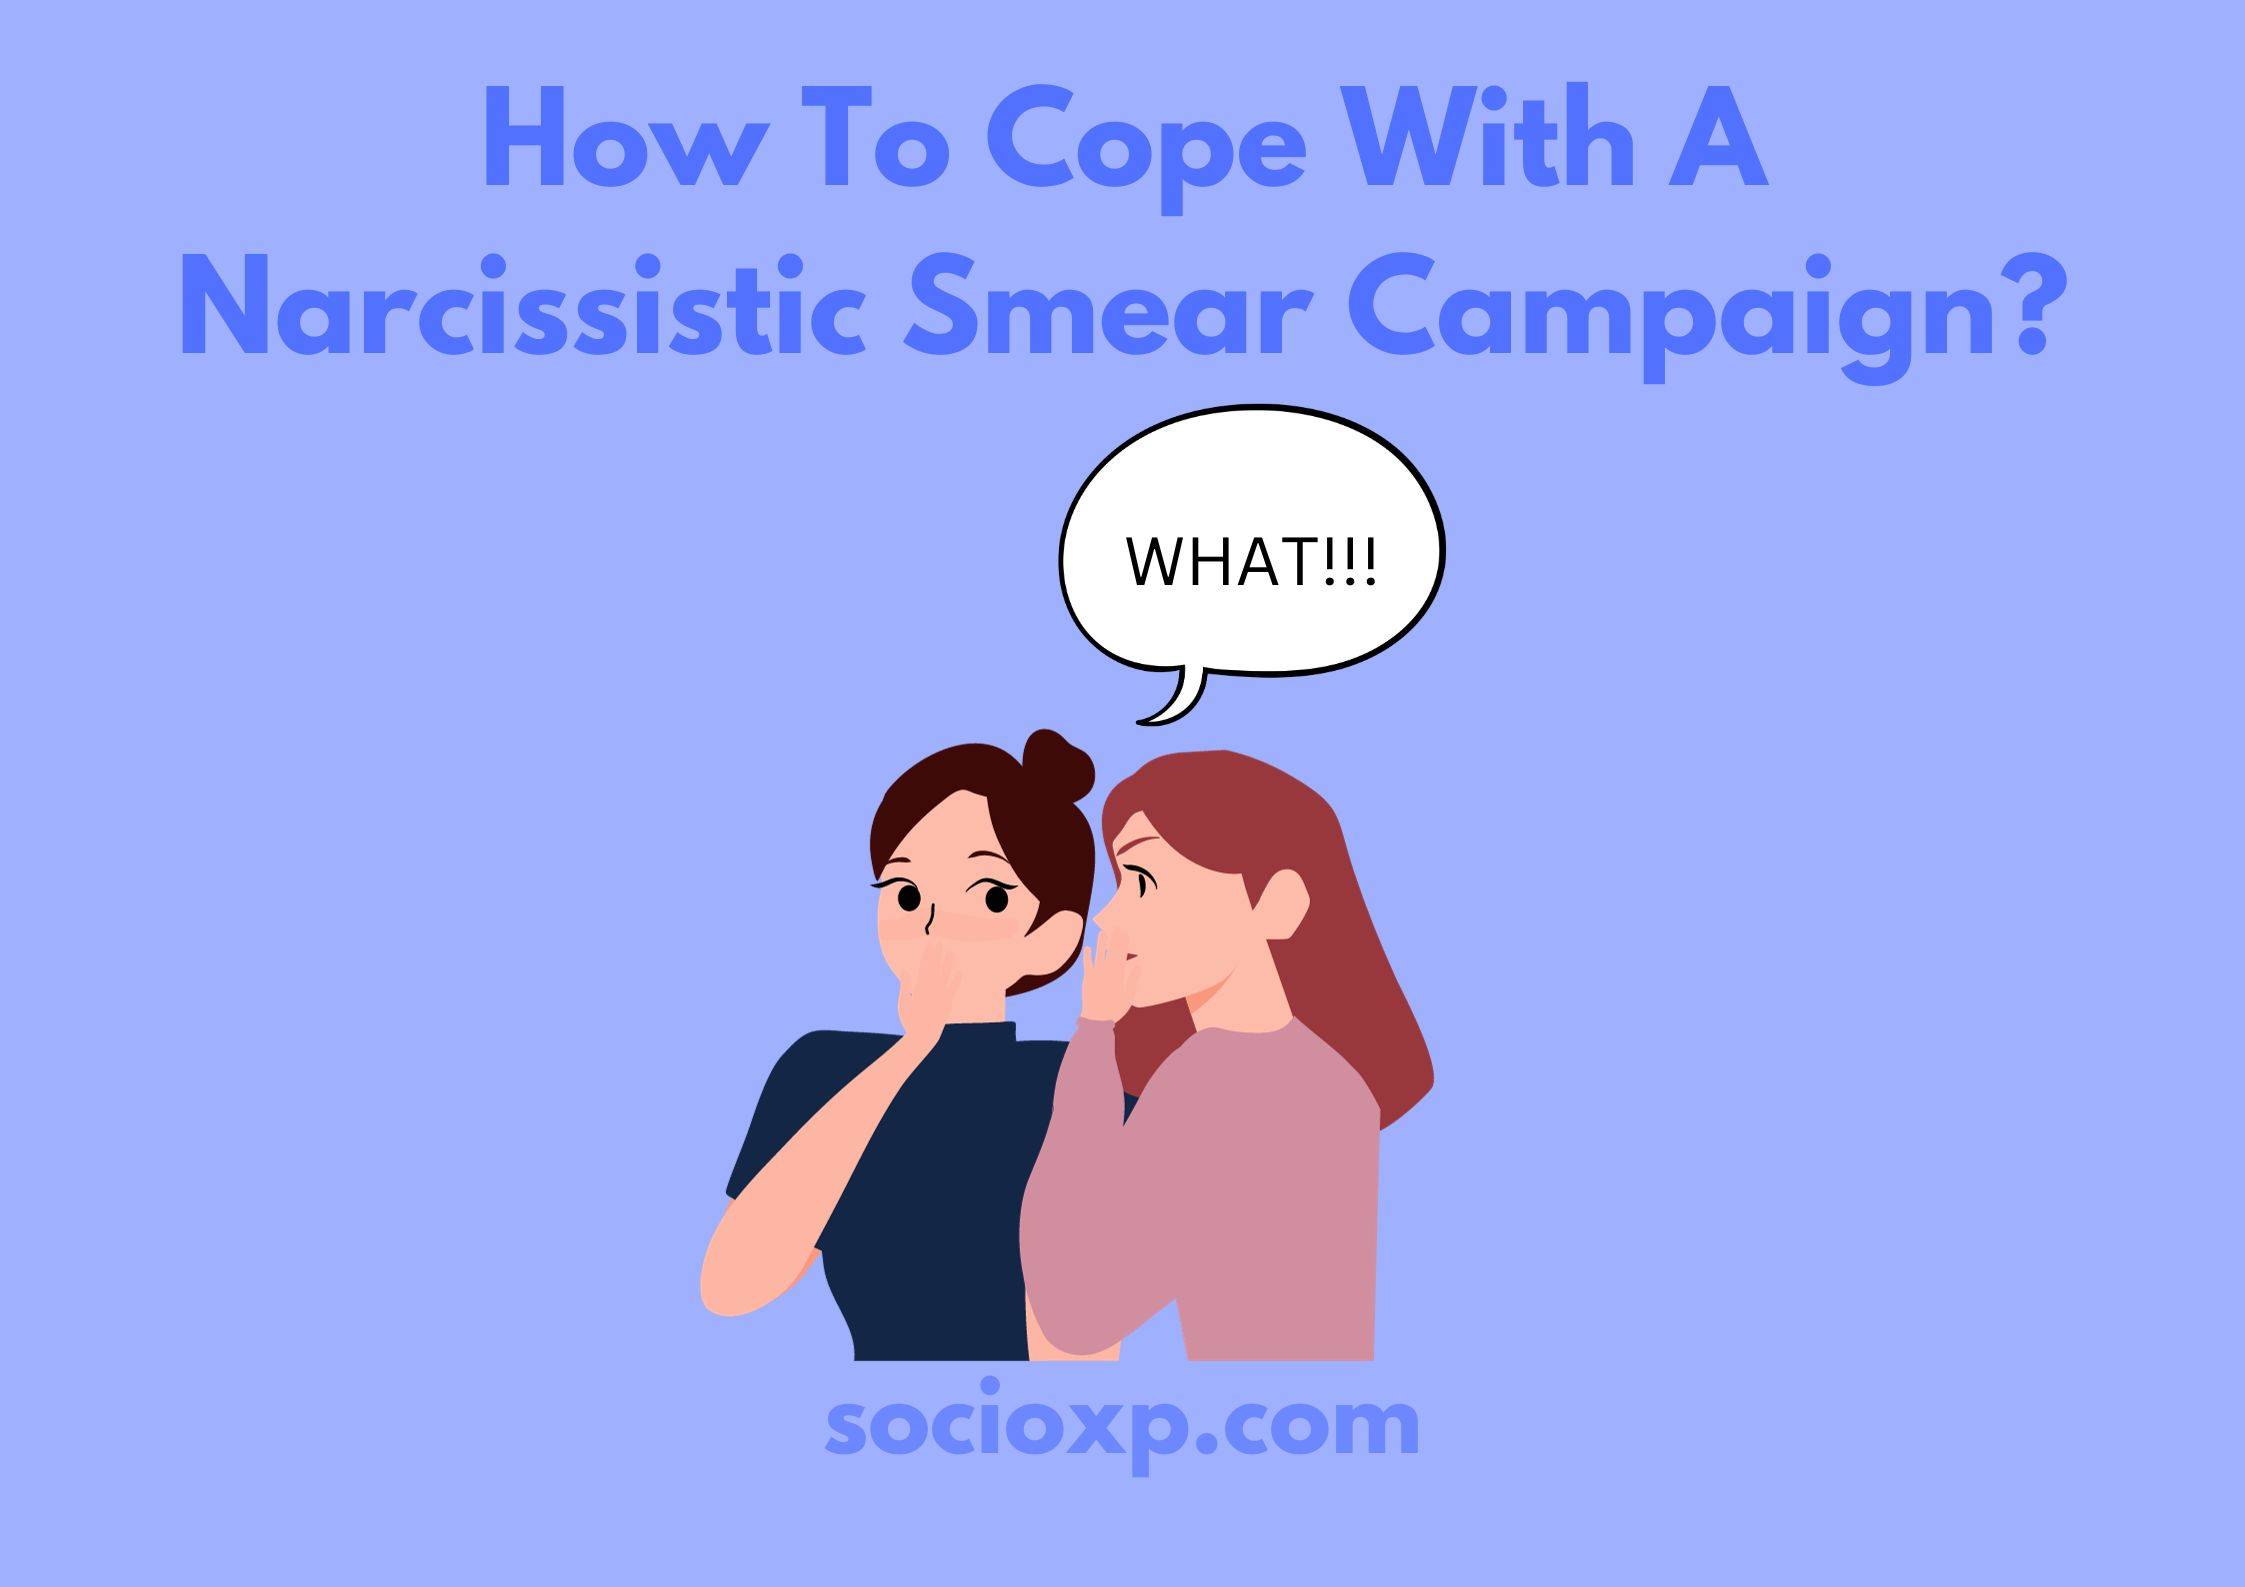 How To Cope With A Narcissistic Smear Campaign?